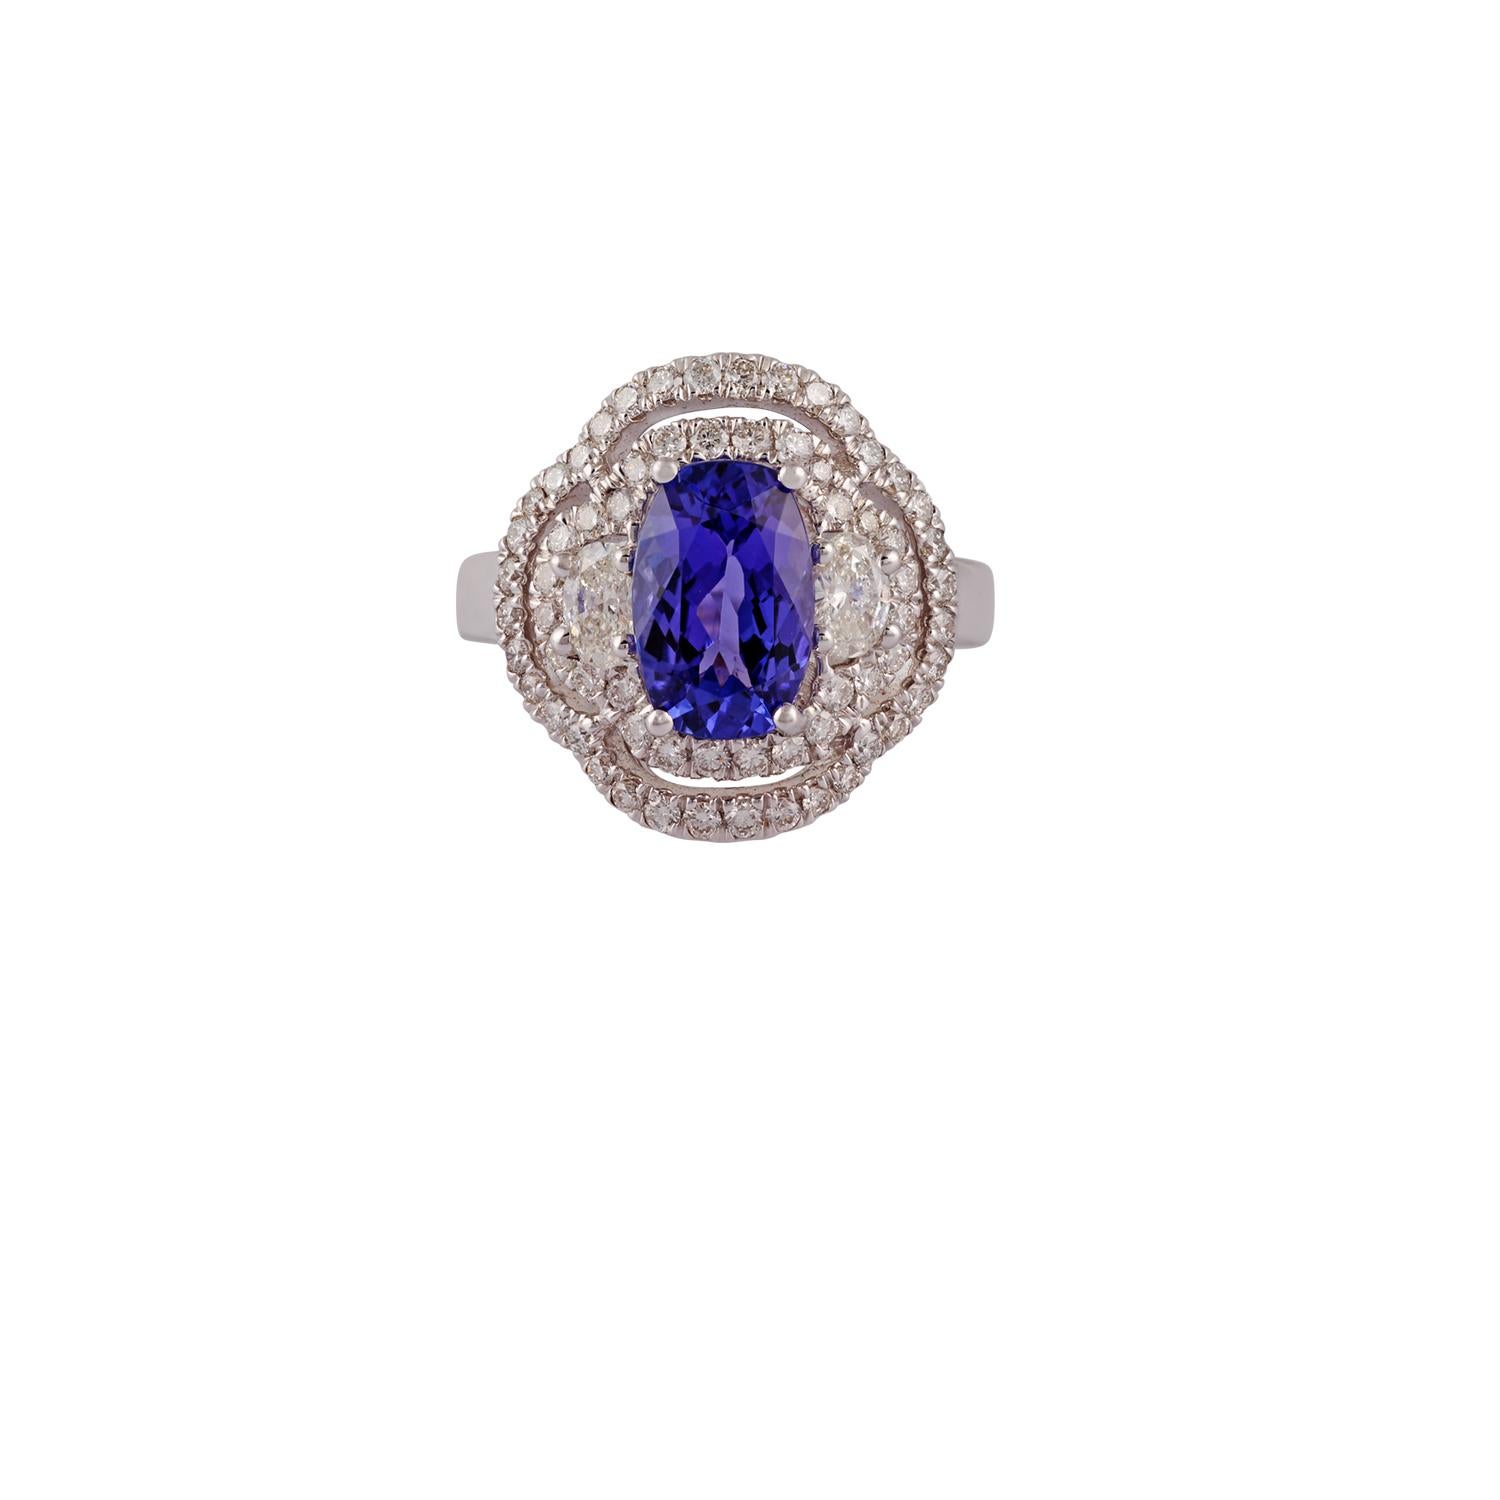 This is an exclusive tanzanite & diamond ring studded in 18k white gold features 1 piece of tanzanite weight 2.91 carat with different shapes of diamond weight - 1.40 carat (combined weight of all diamonds) this entire ring is made of 18k white gold